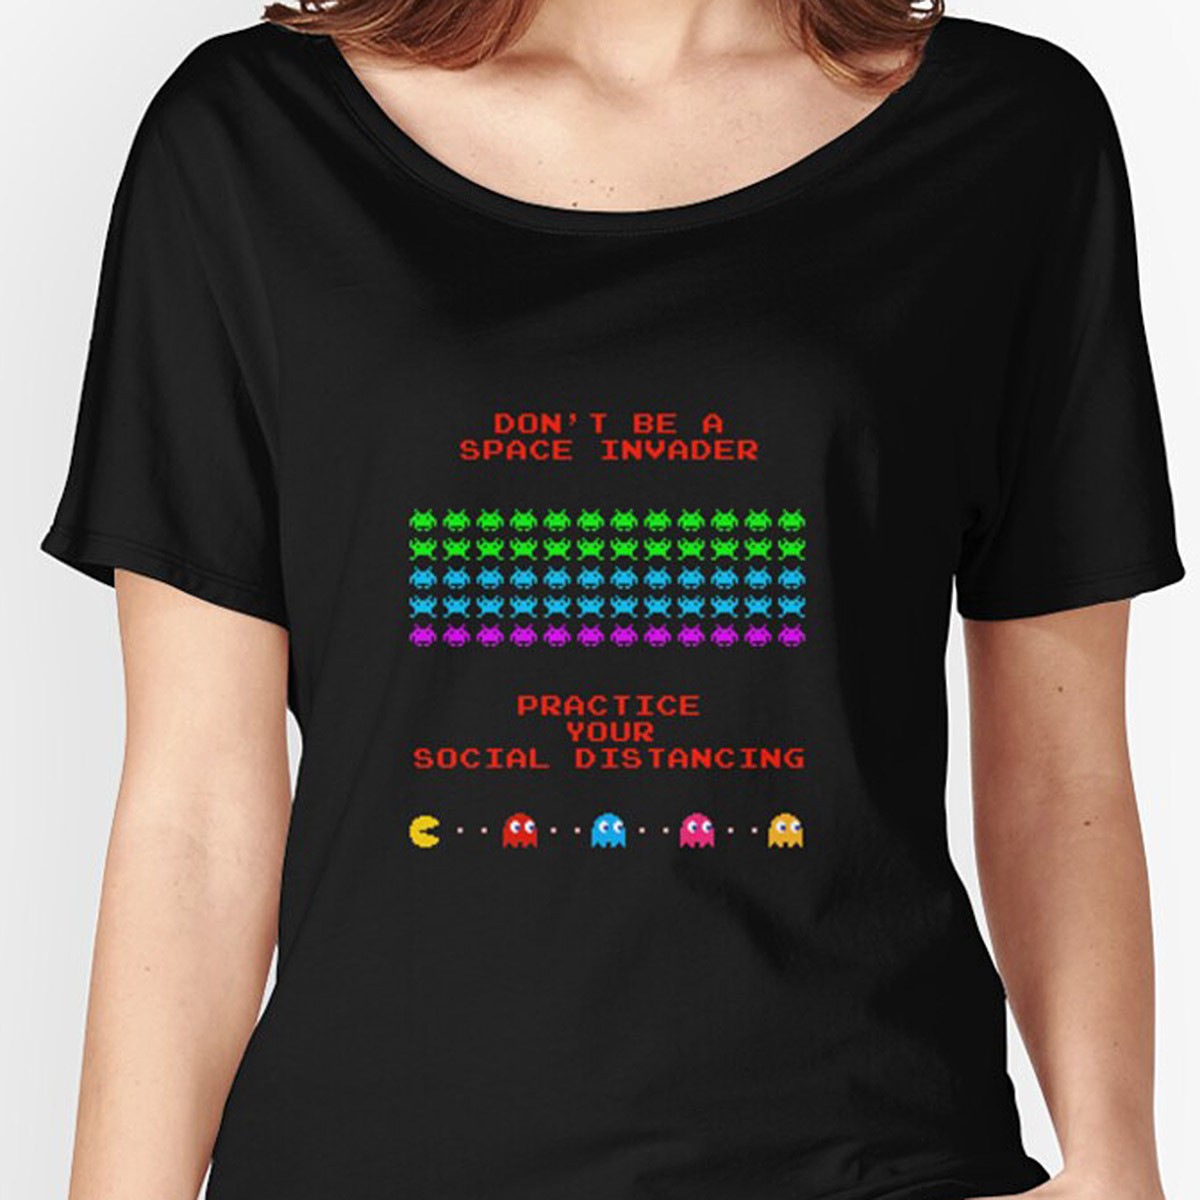 Don't be a Space Invader - Practice Social Distancing Relaxed Fit T-Shirt by NTK Apparel